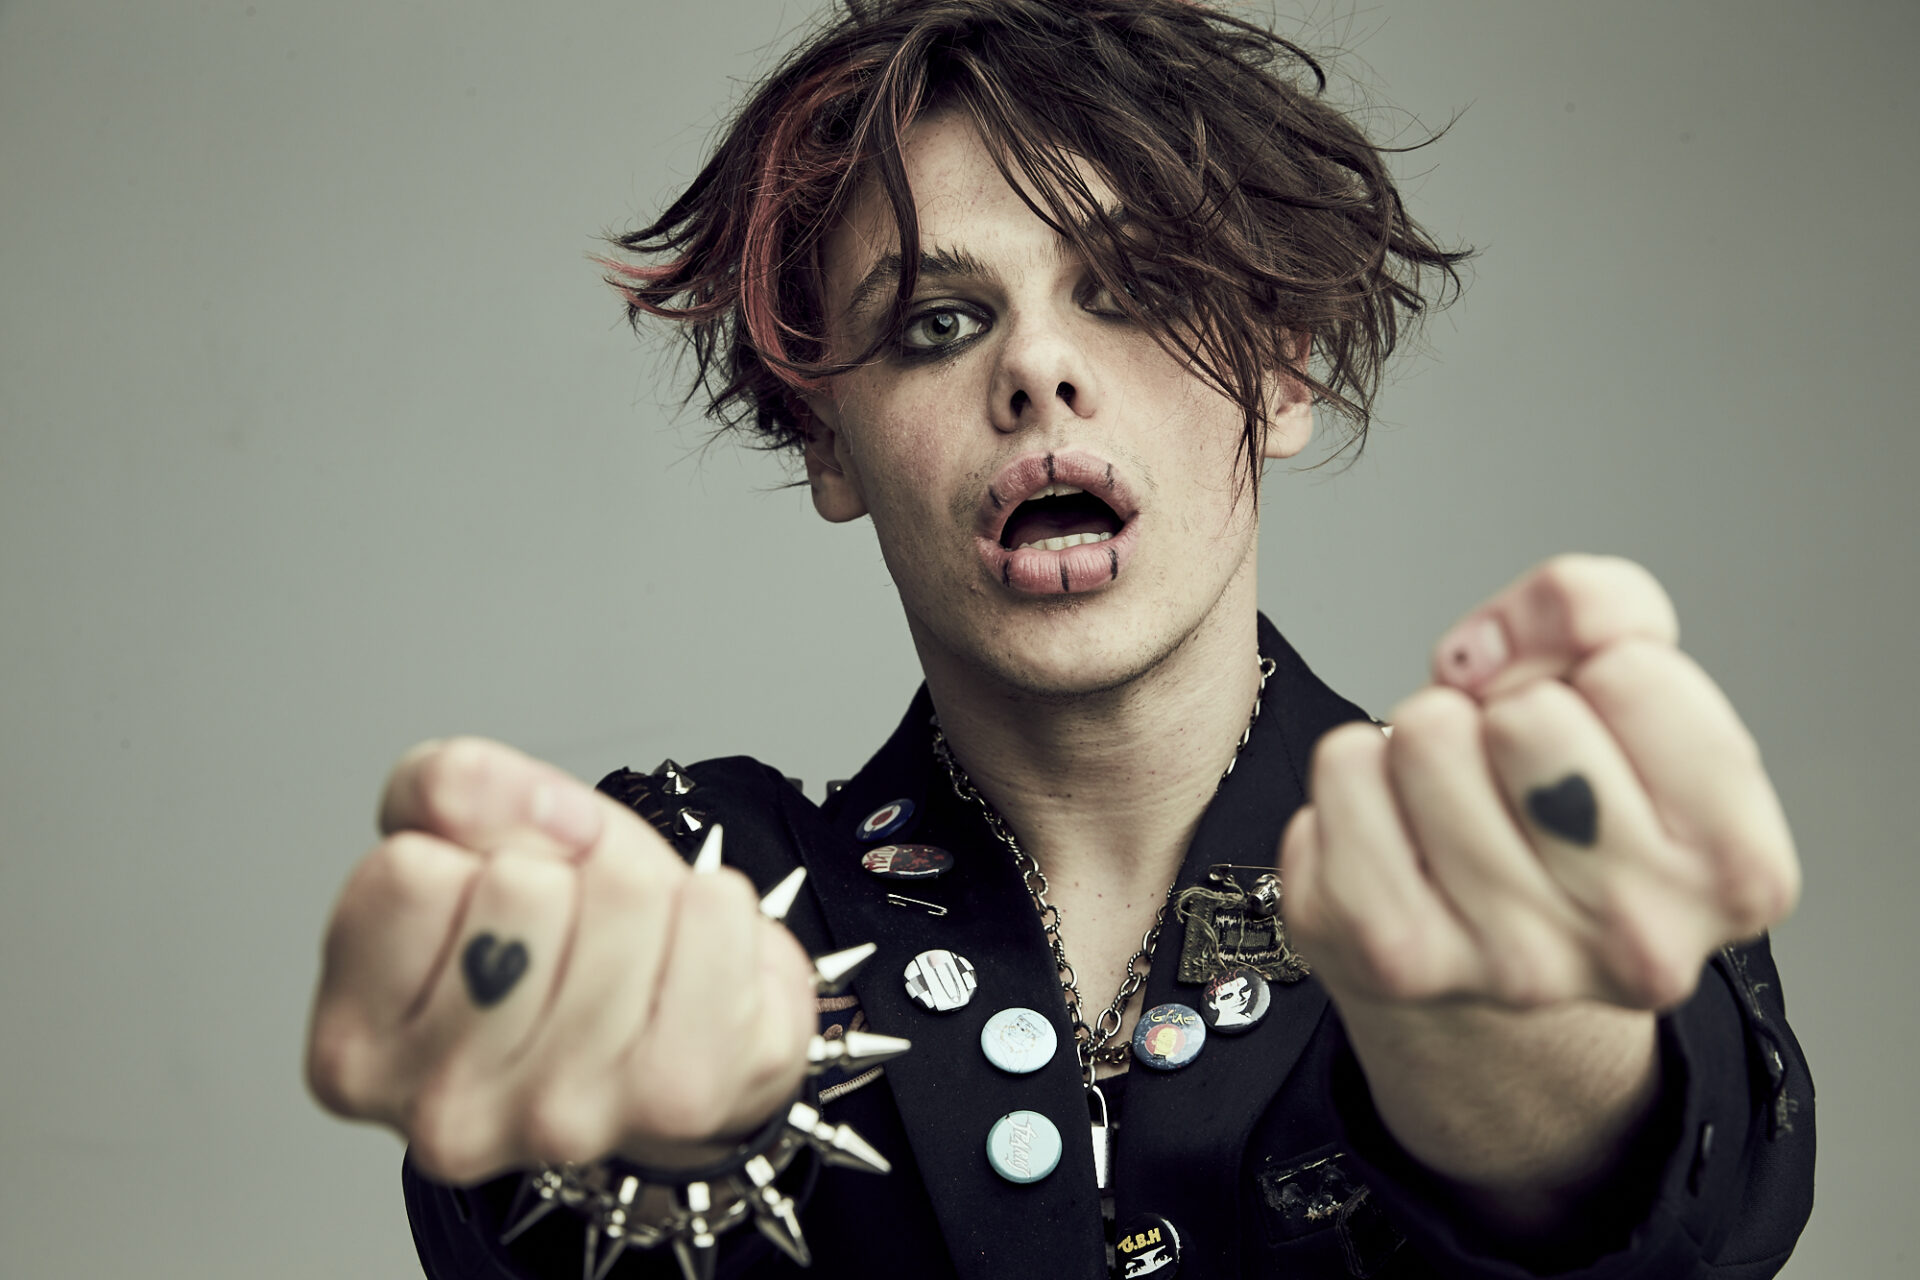 Yungblud releases new single, “Cotton Candy”